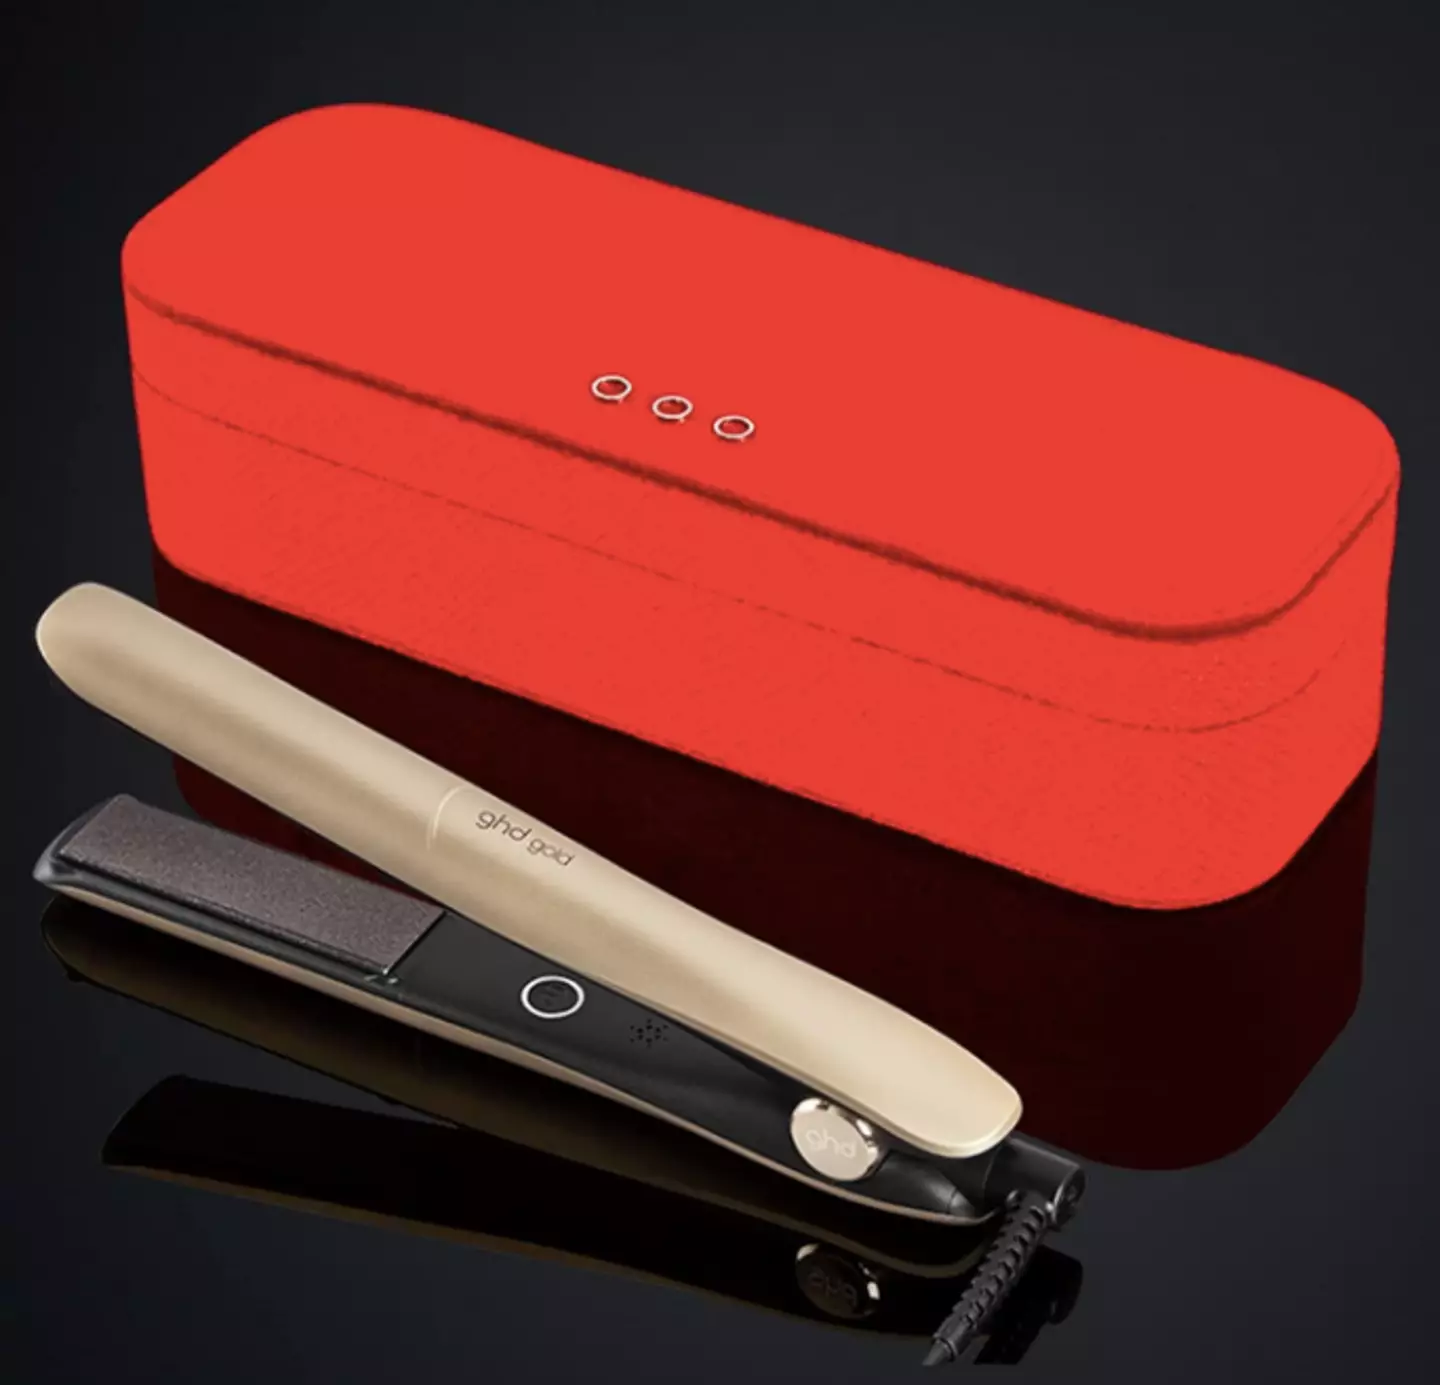 This styling set comes with a must-have case.